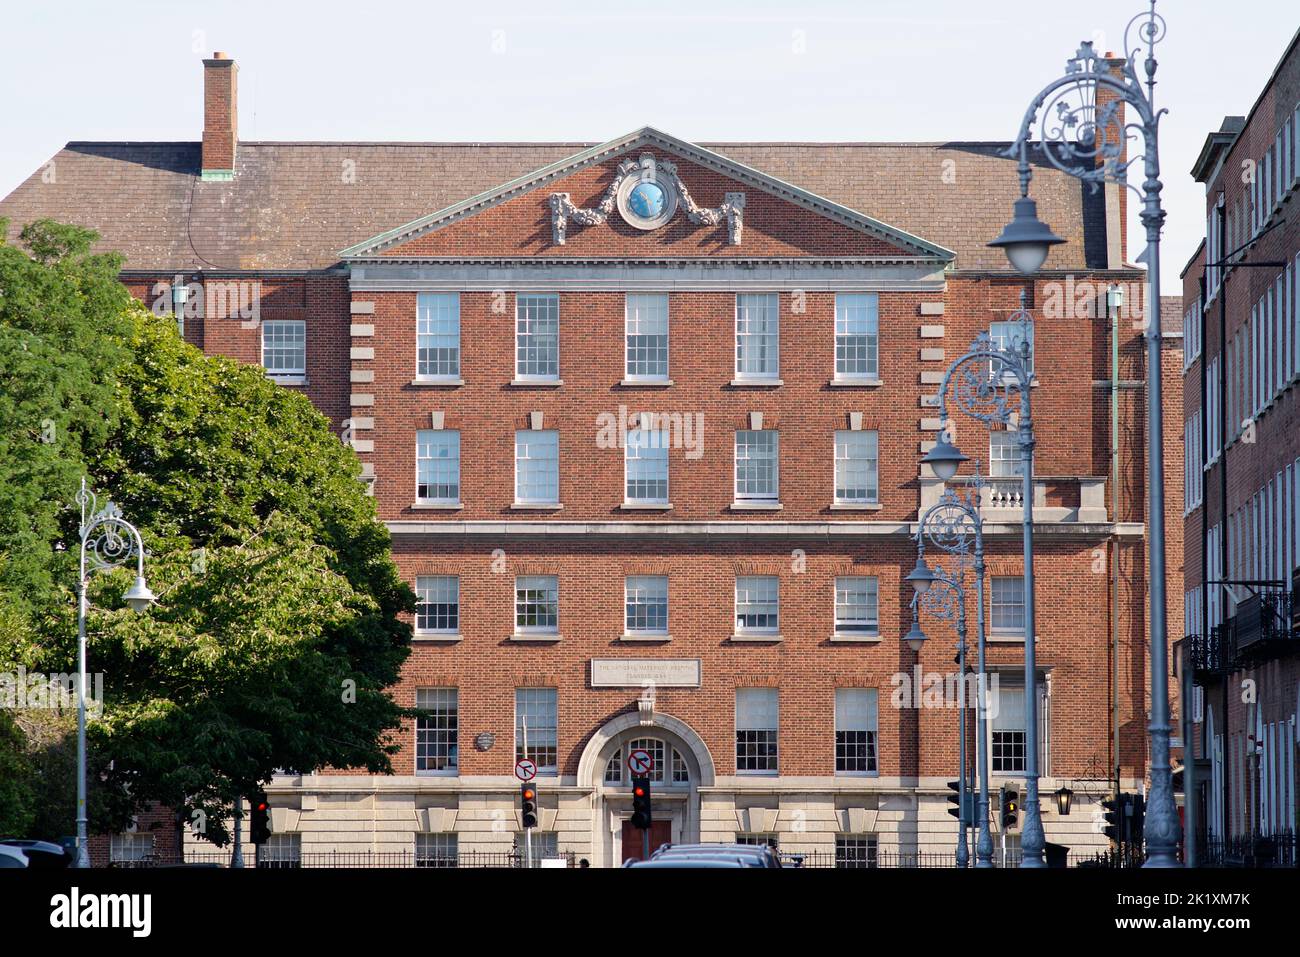 The National Maternity Hospital of Ireland in Dublin, whose motto is Life Glorious Life. Situated in Holles Street, Dublin 2. Stock Photo